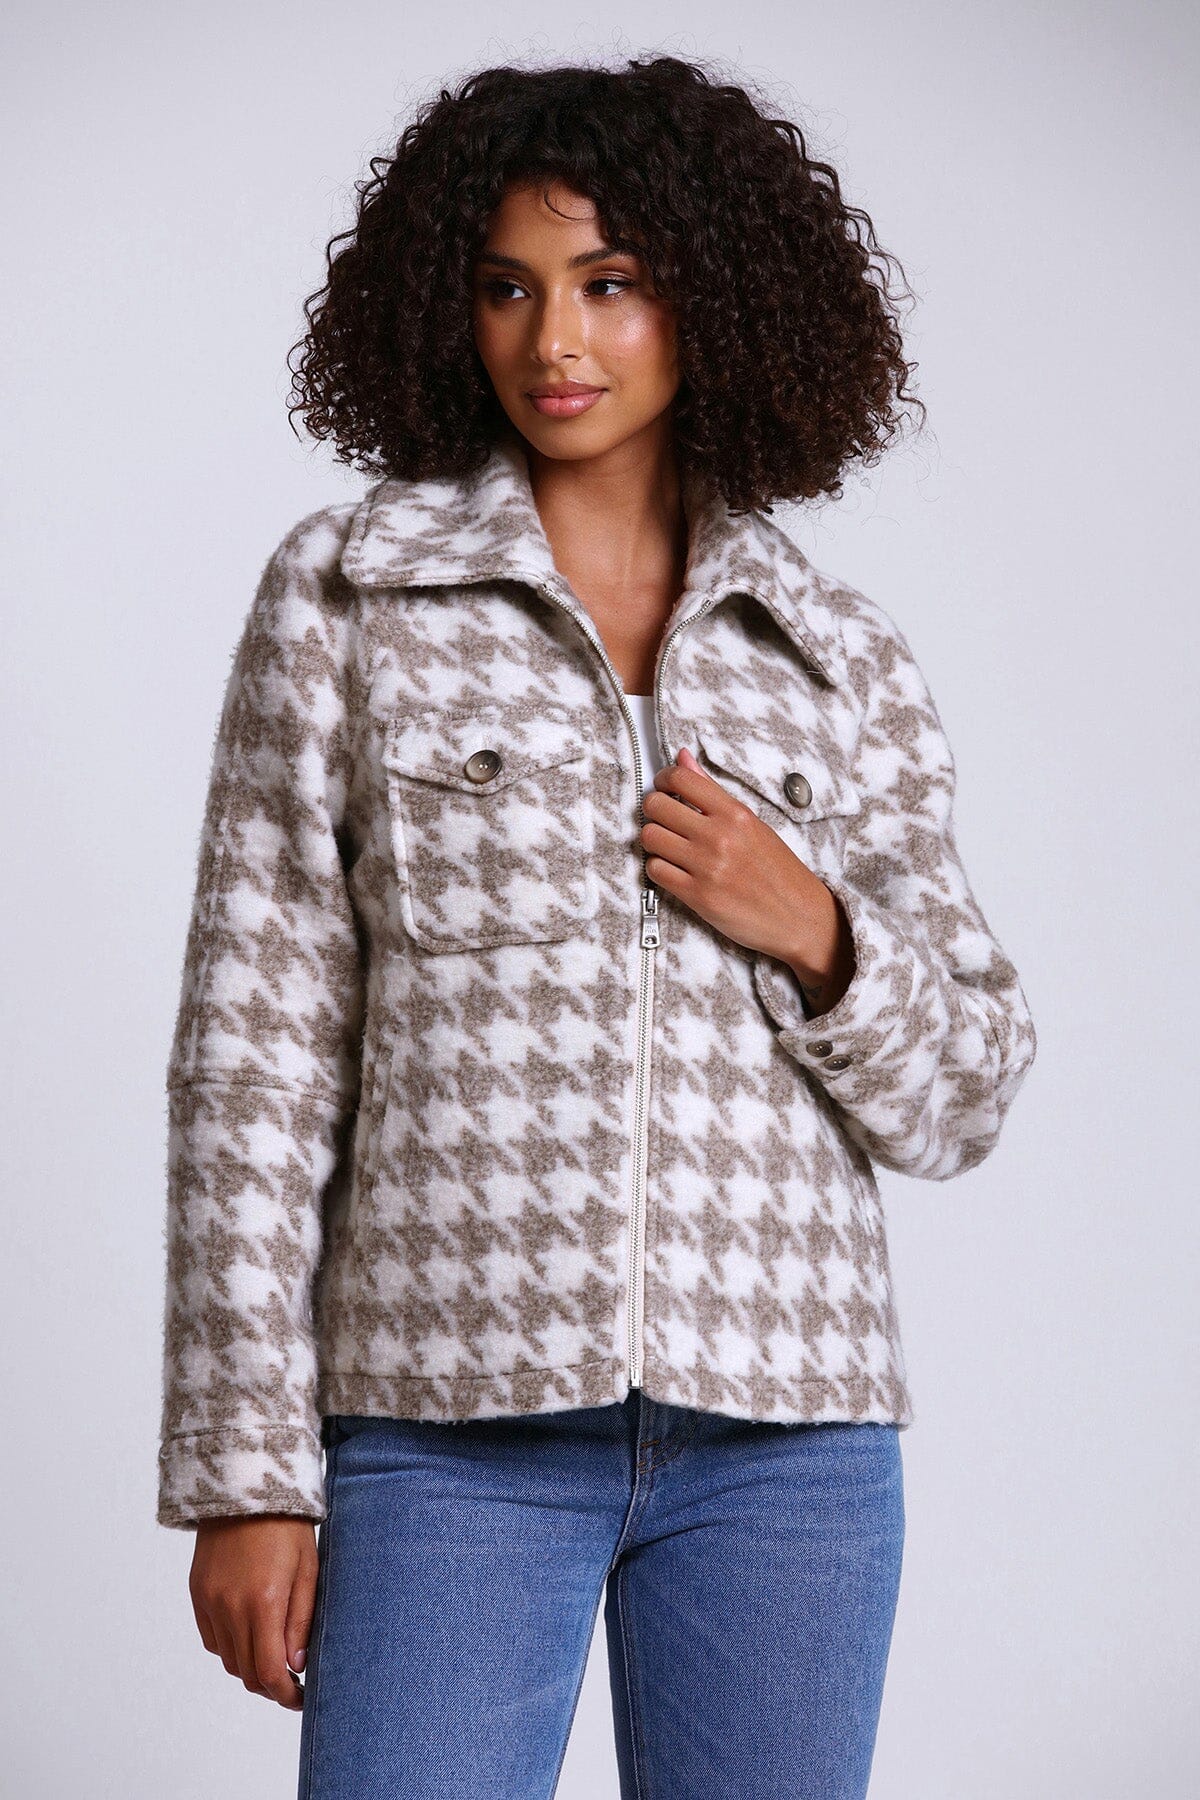 printed full zip up front jacket shacket coat neutral tan beige and cream plaid - 